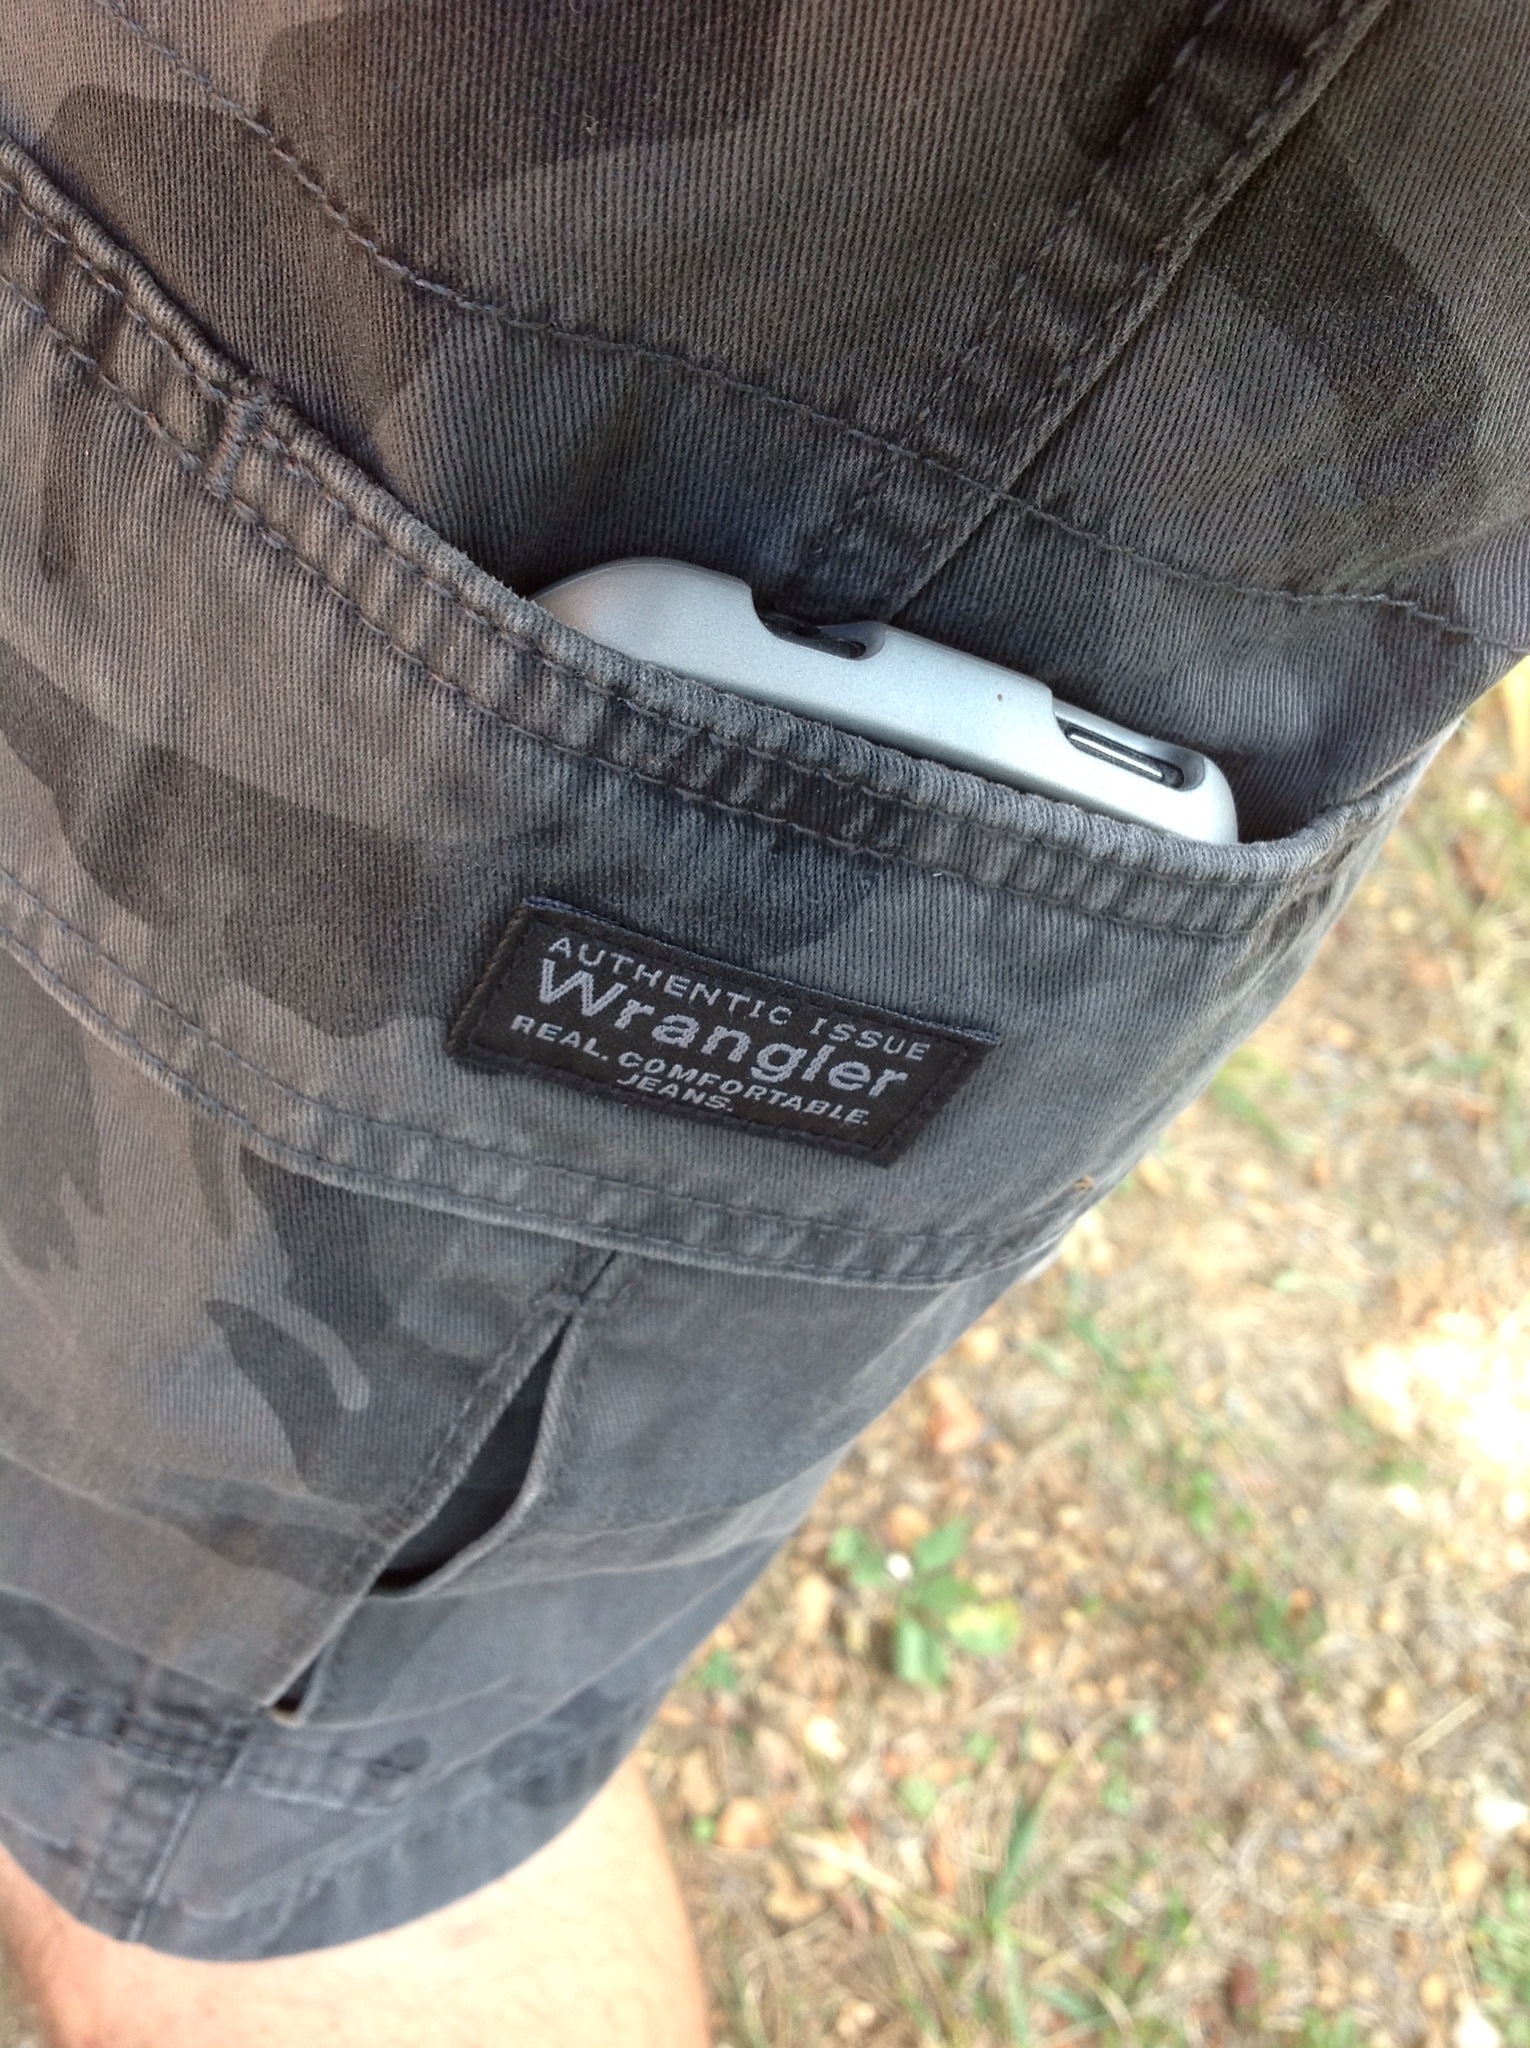 Wrangler Real Comfortable Jeans Cargo Shorts Online, SAVE 57% -  